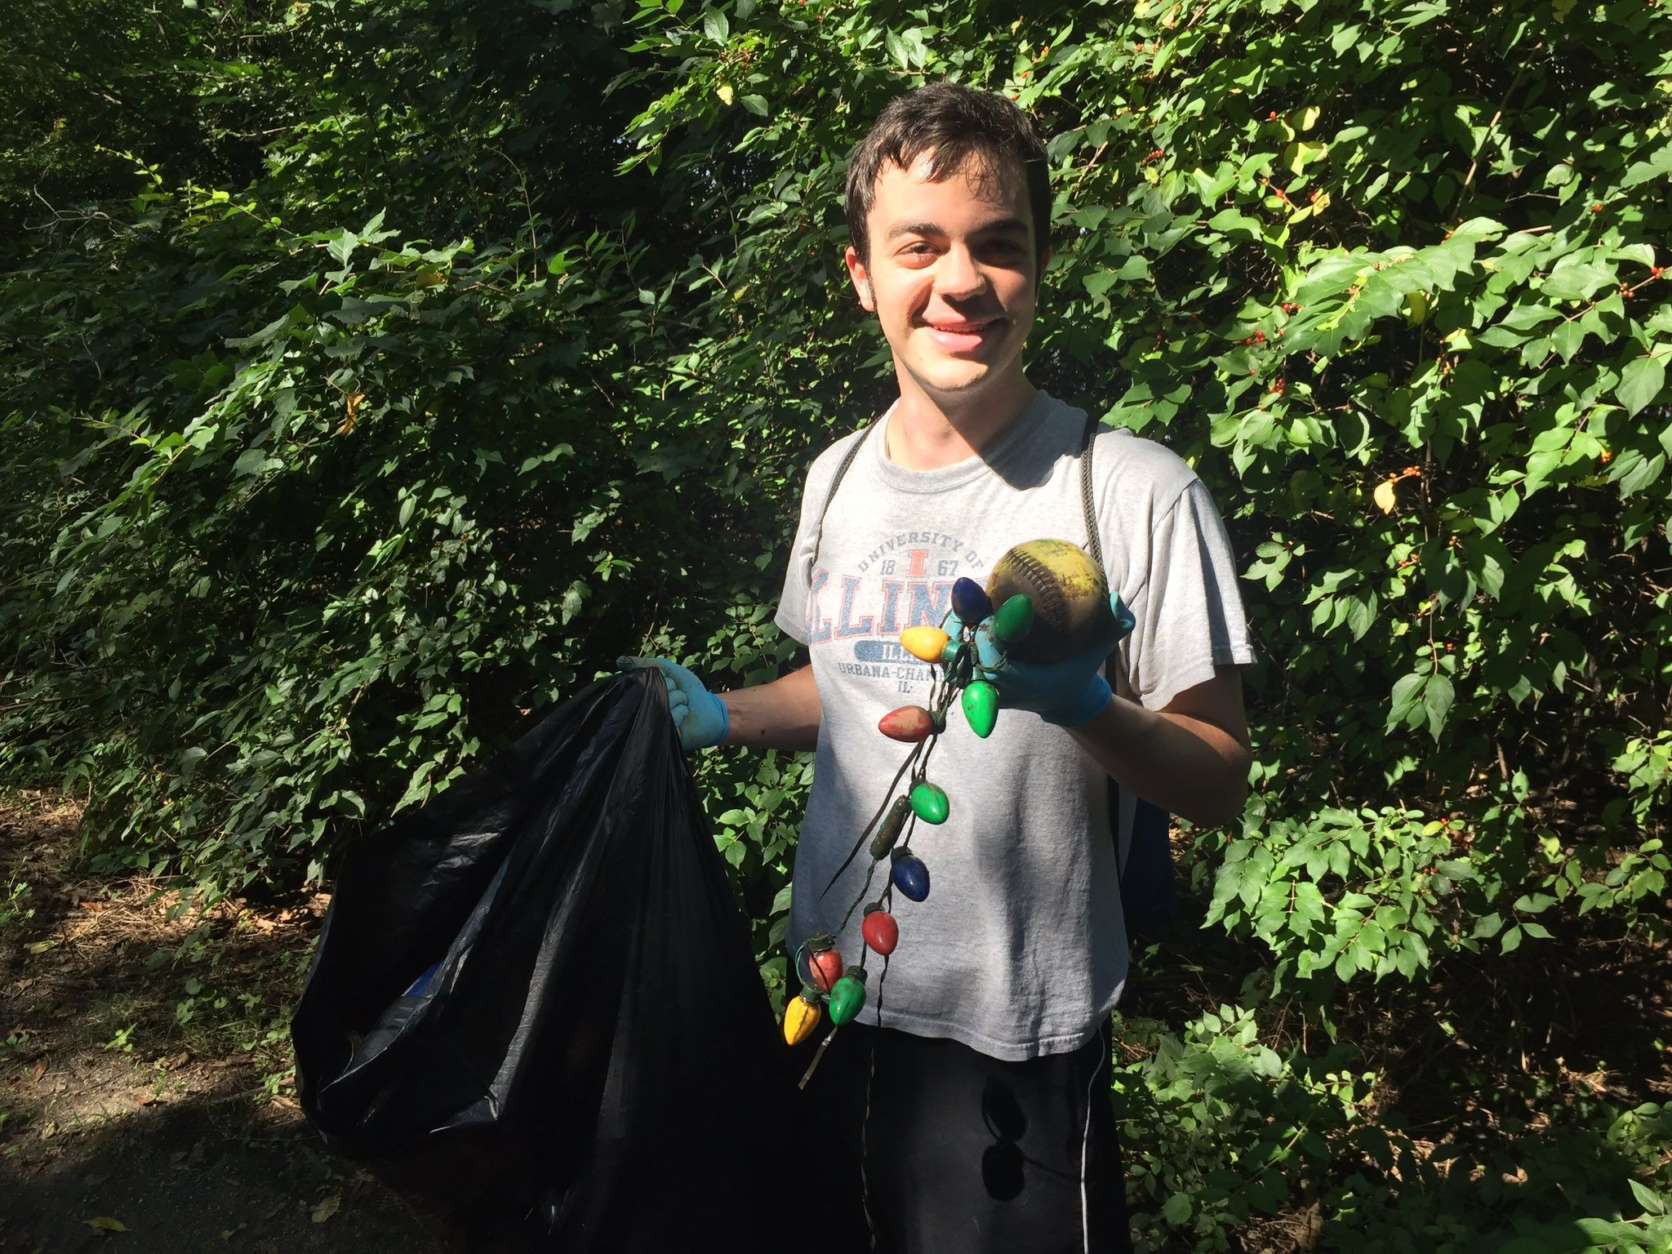 Paul Christianson of Tenleytown shows off his nomination for oddest trash found during Anacostia cleanup Sept. 16, 2017. (WTOP/John Domen)